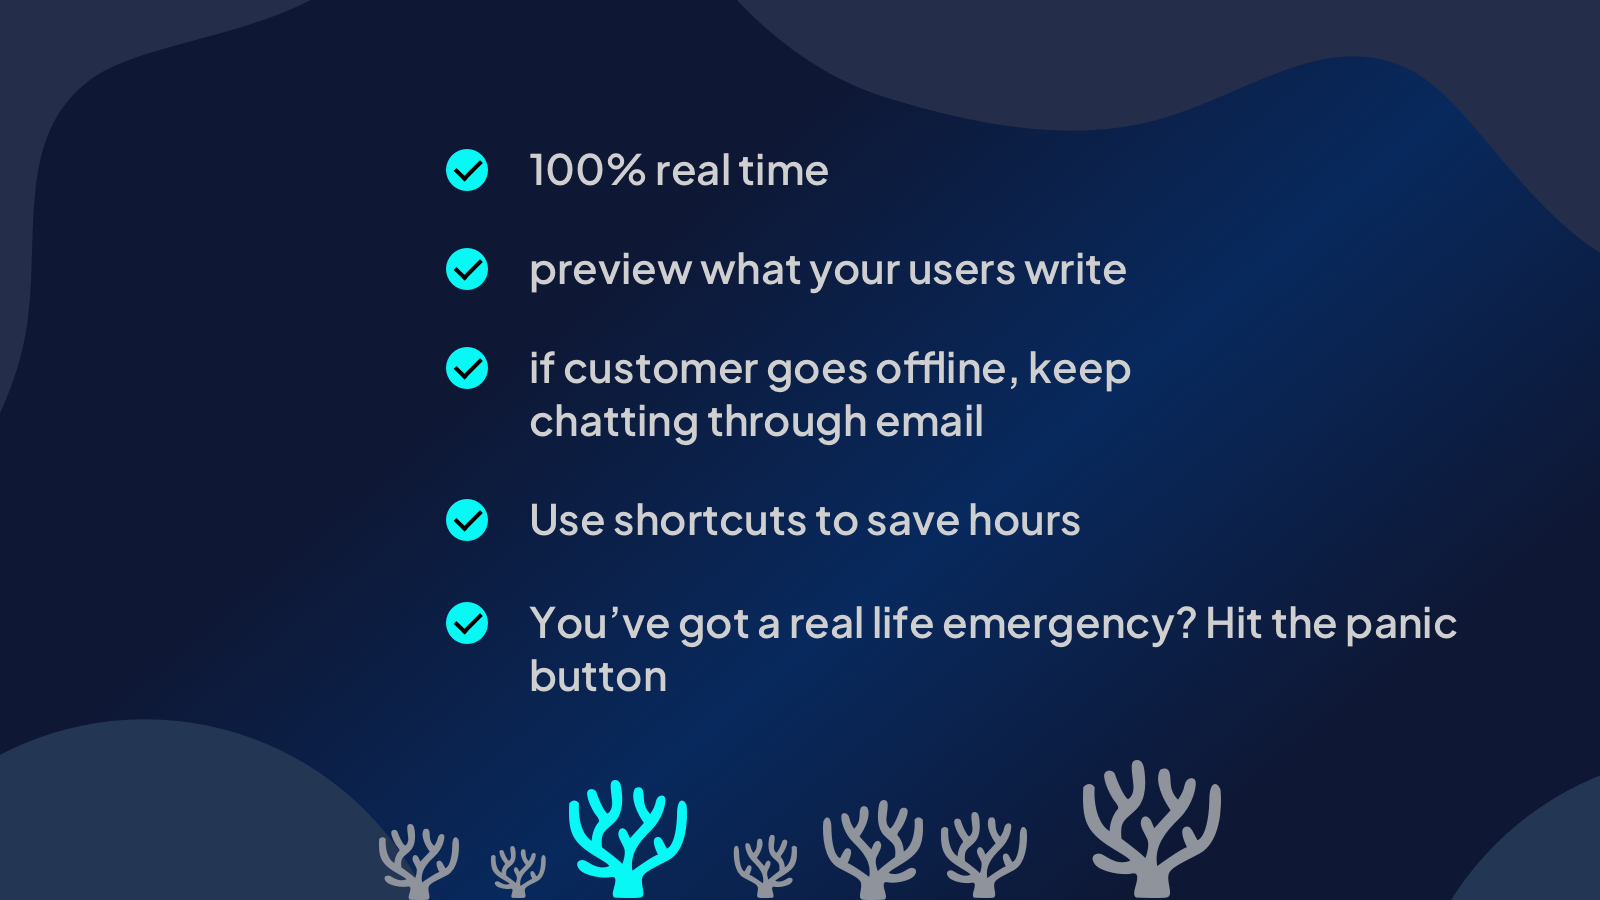 real time + preview what user types + send follow up emails